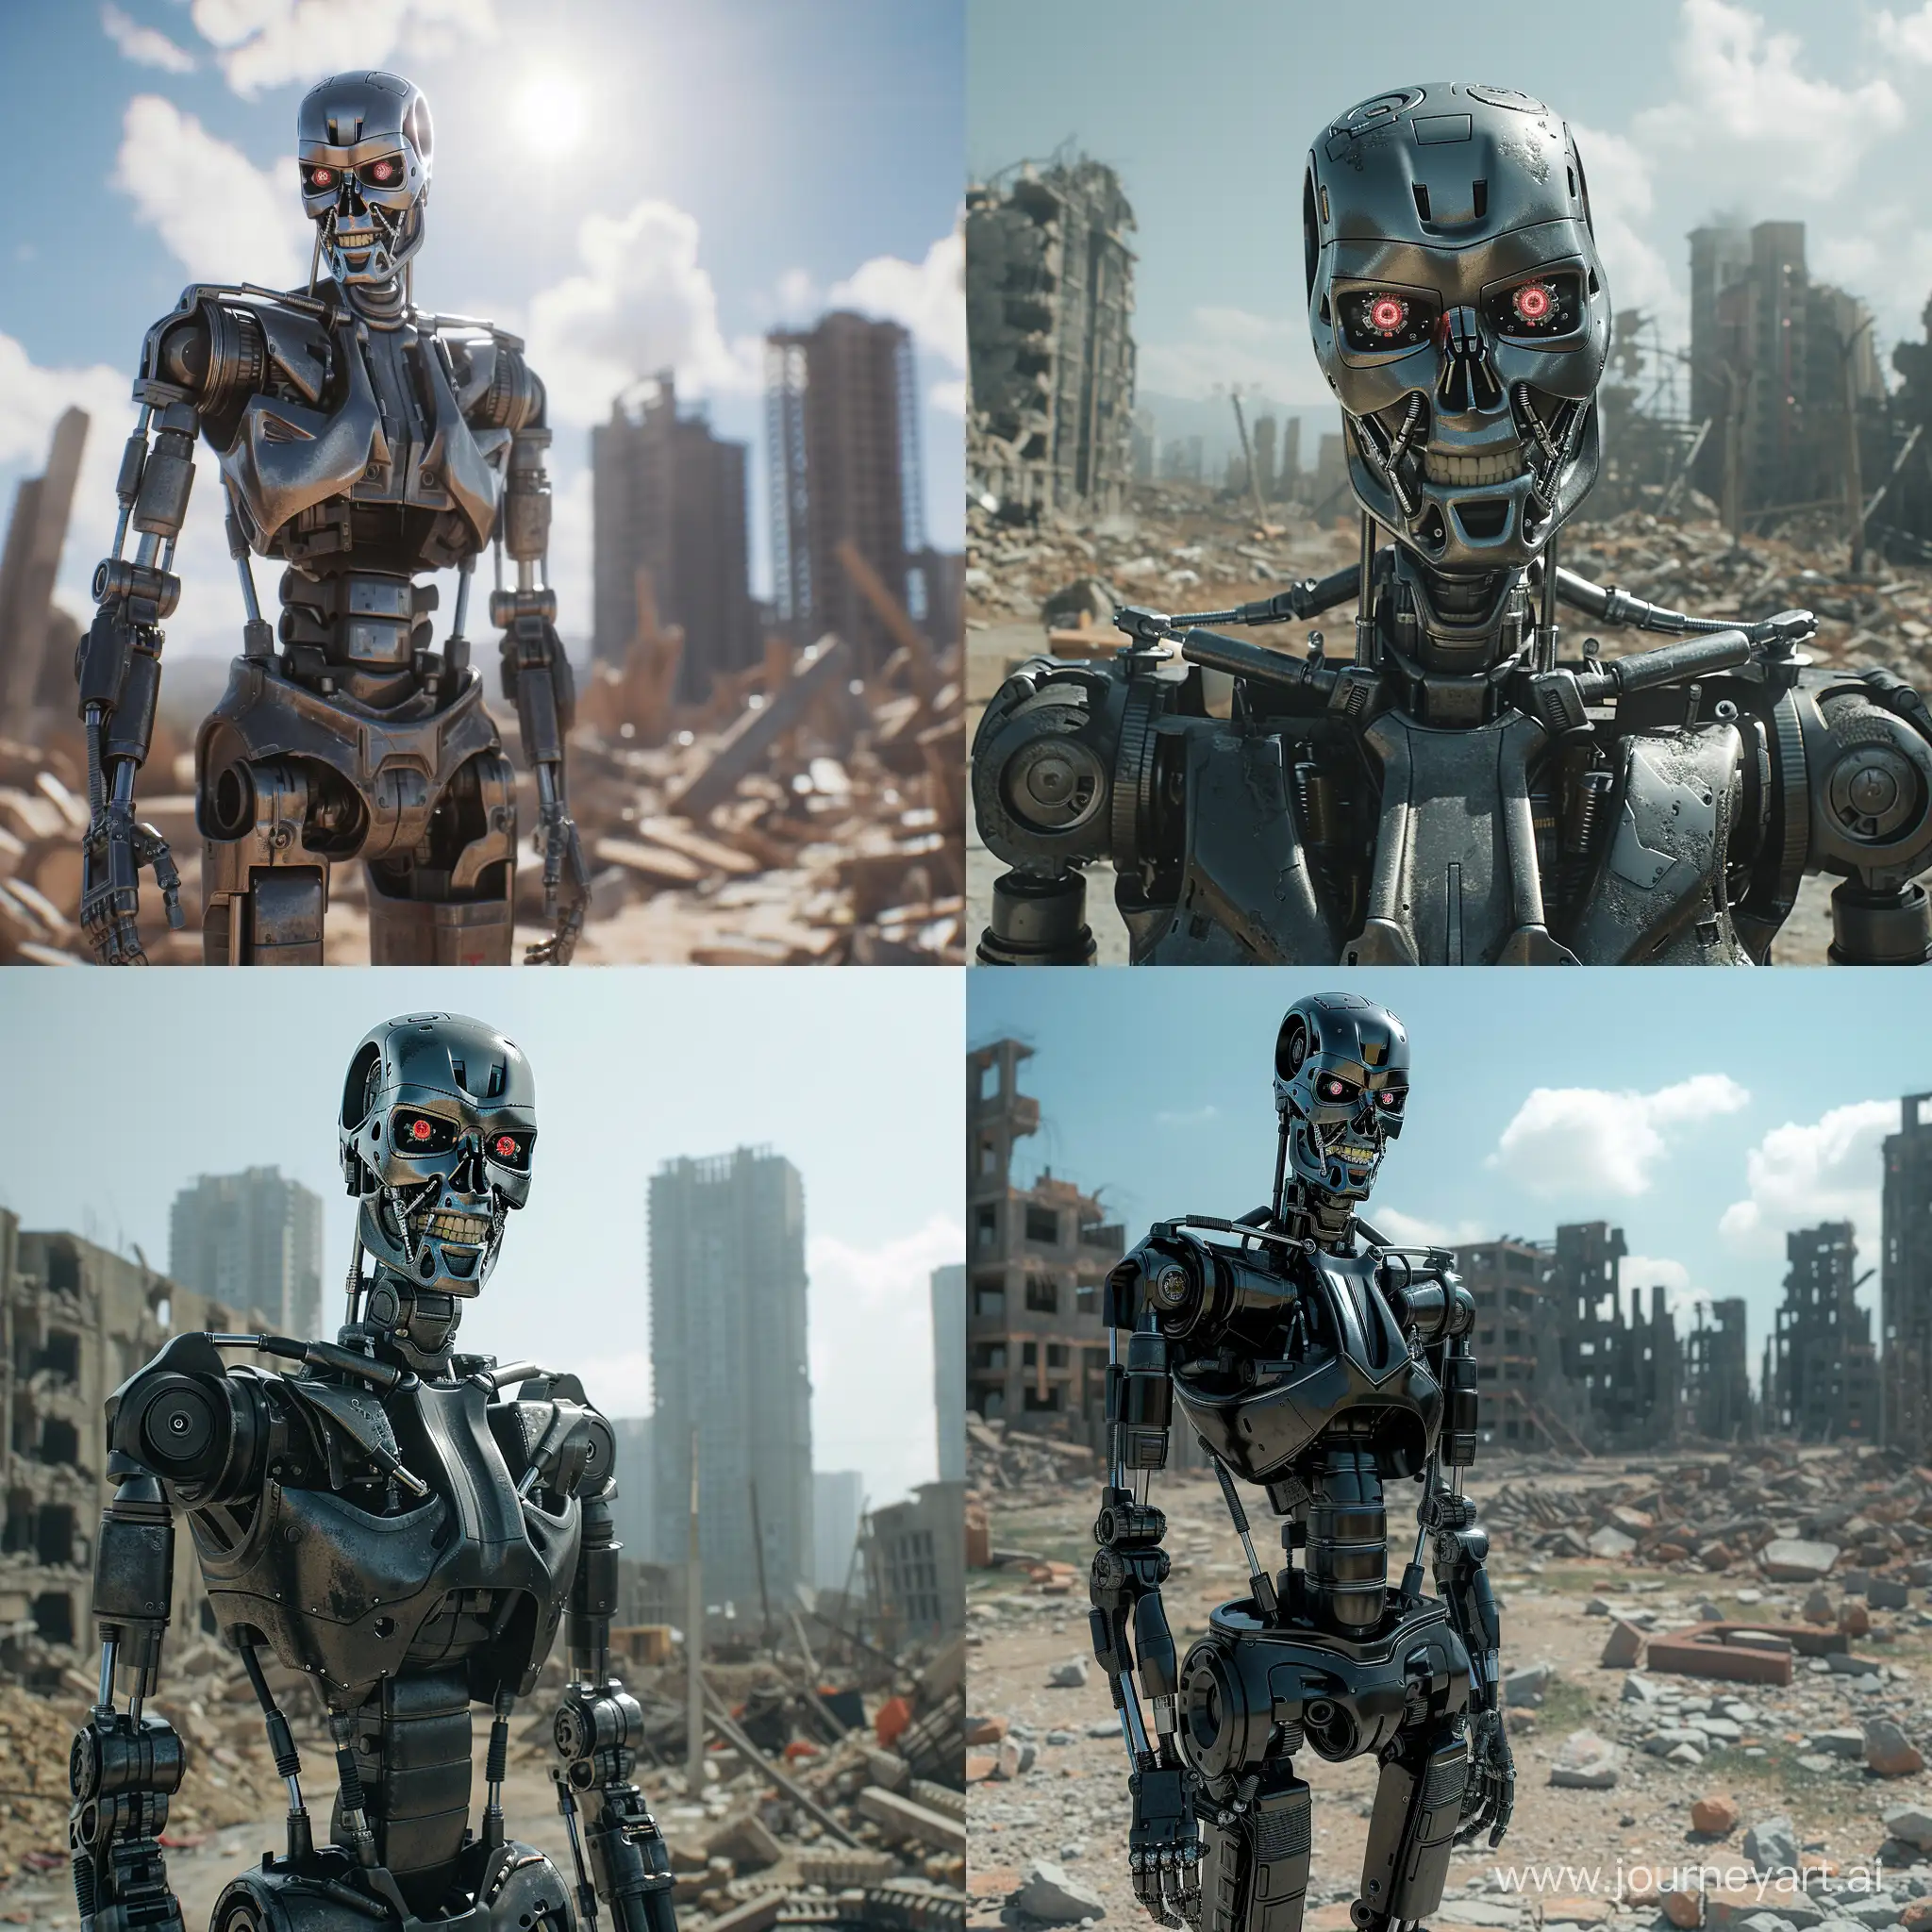 Terminator-T850-Amidst-City-Ruins-on-a-Sunny-Day